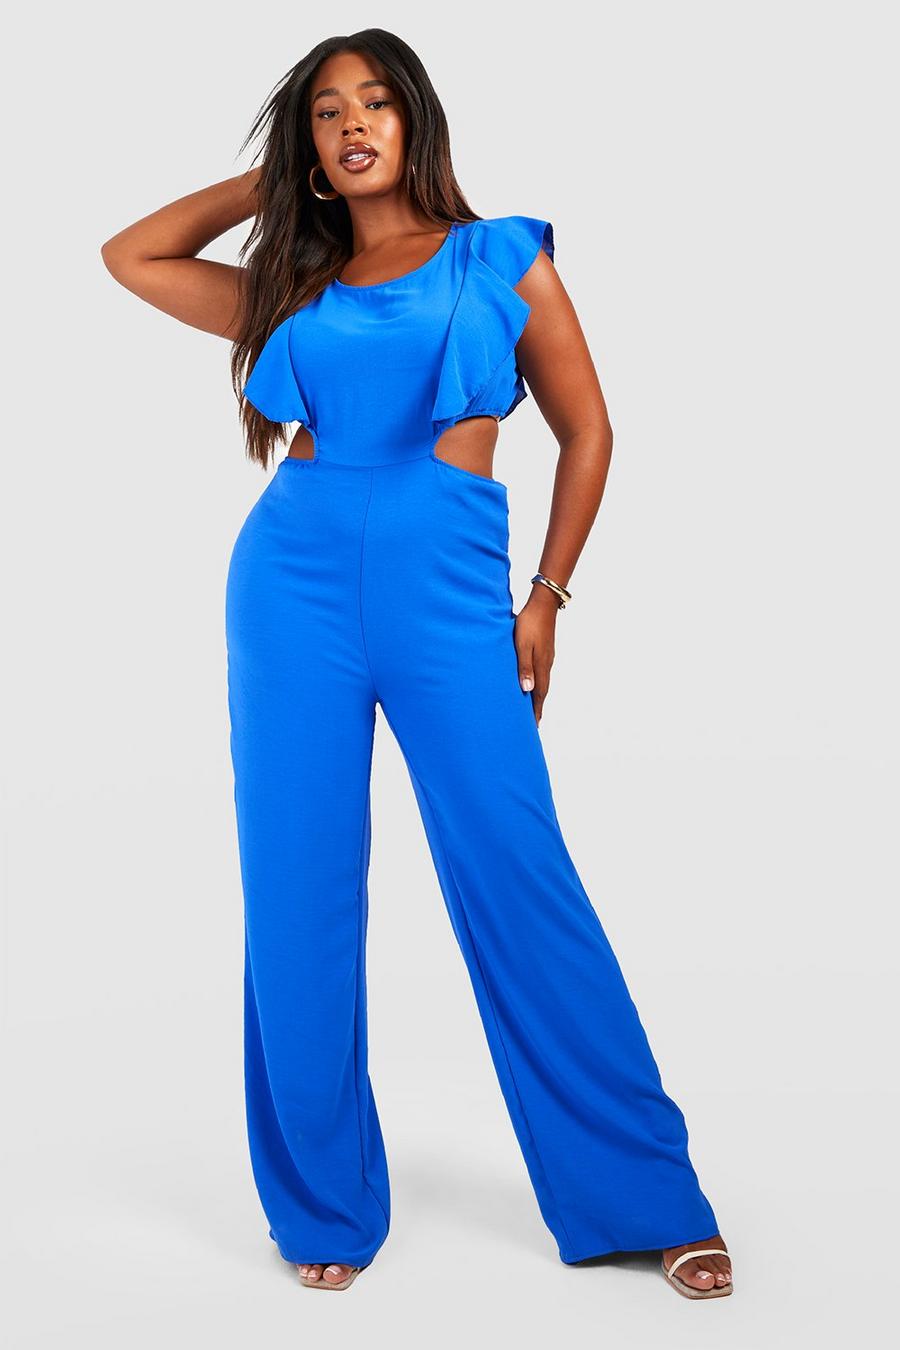 Plus Size Rompers | Plus Size Jumpsuits boohoo